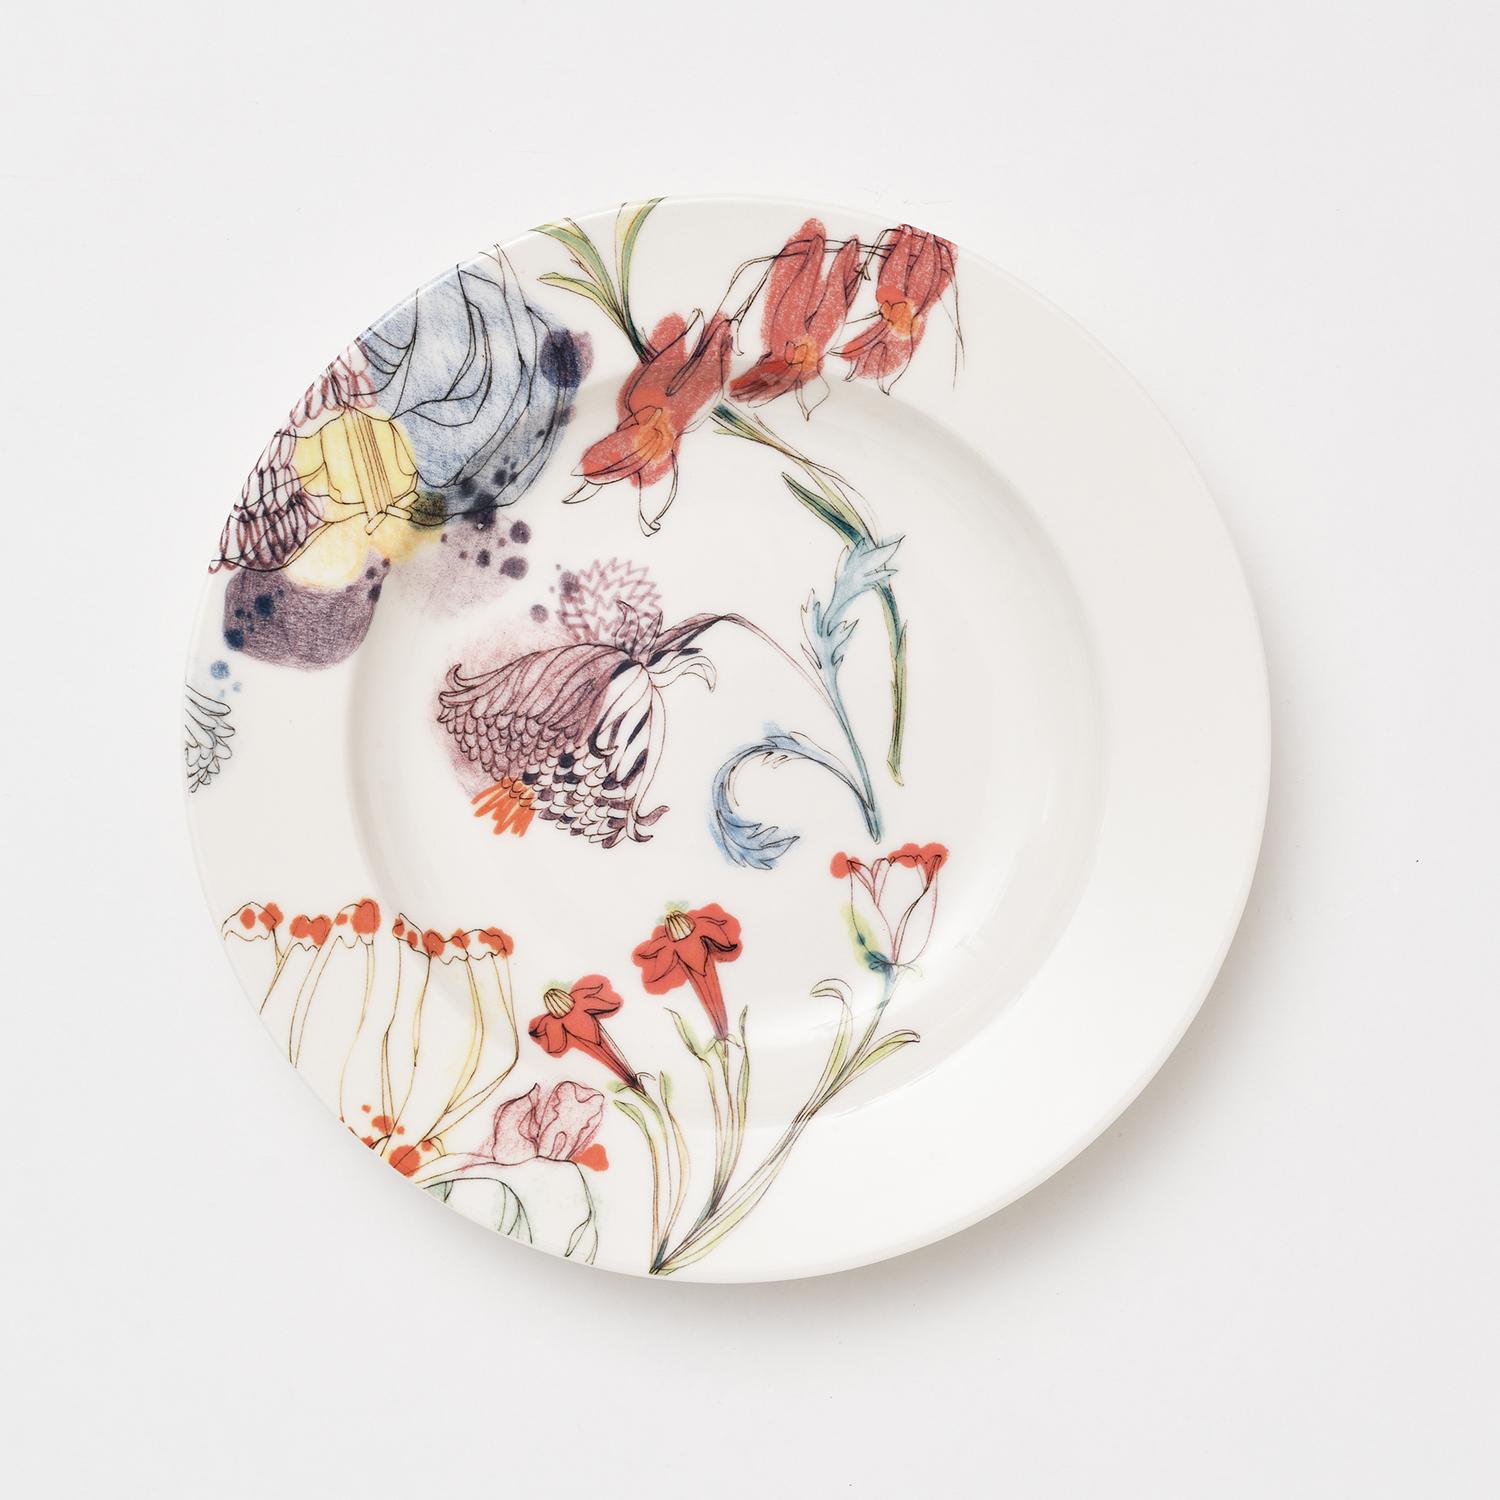 Belonging to the Grandma's Garden porcelain series, the design of these pasta plates represents a sophisticated and elegant floral designs full of blossoms and buds with delicate colors blending together for a fresh and contemporary look, typical of